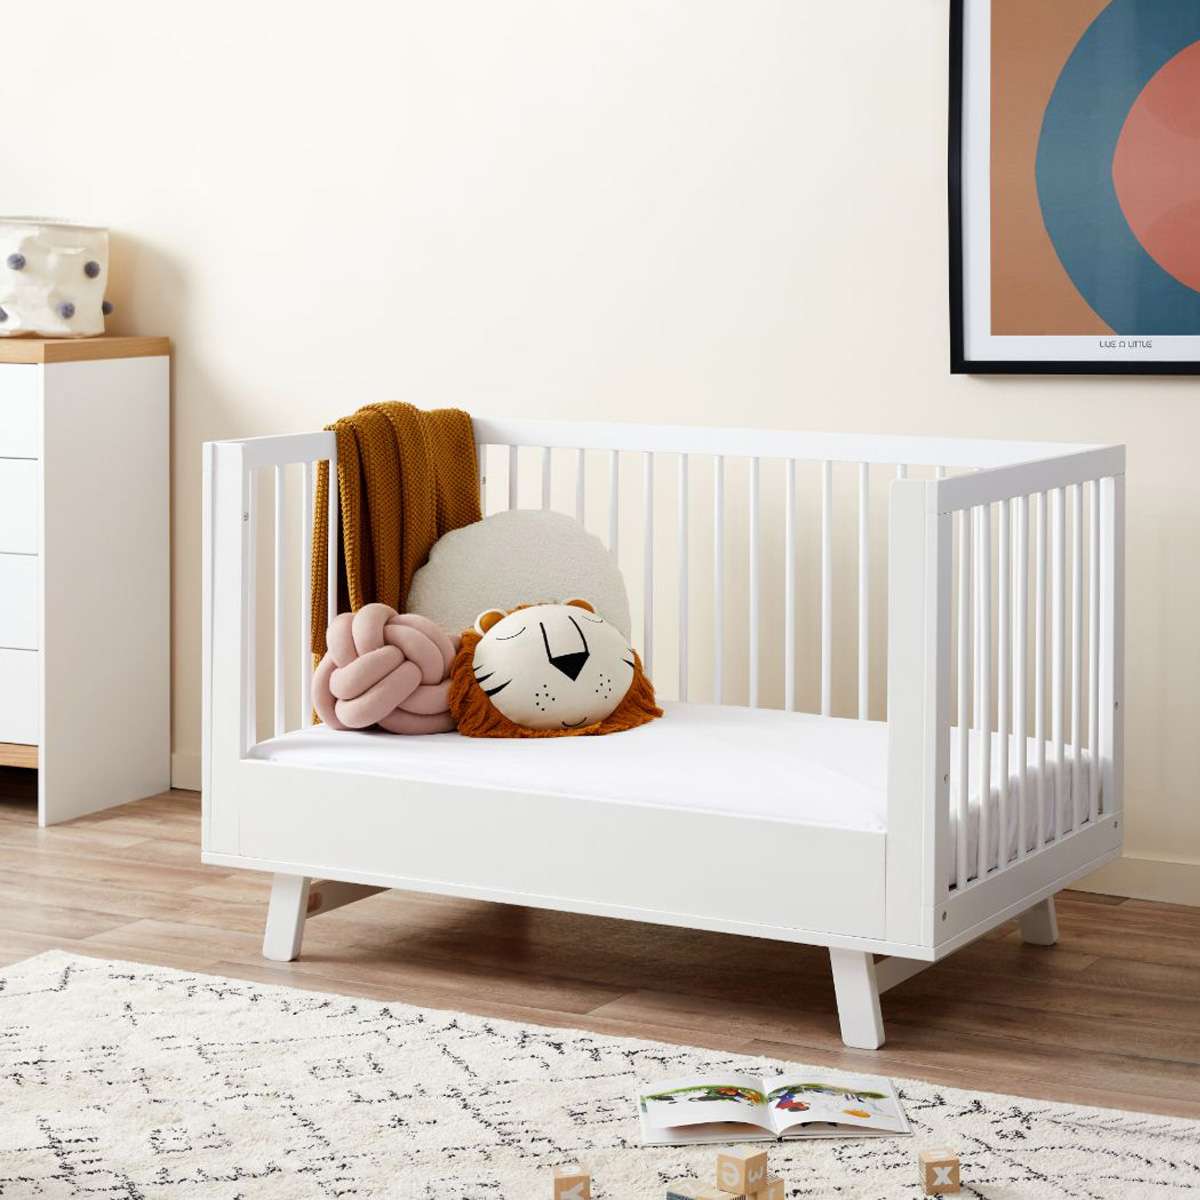 Aspen Cot Toddler Bed Conversion - White